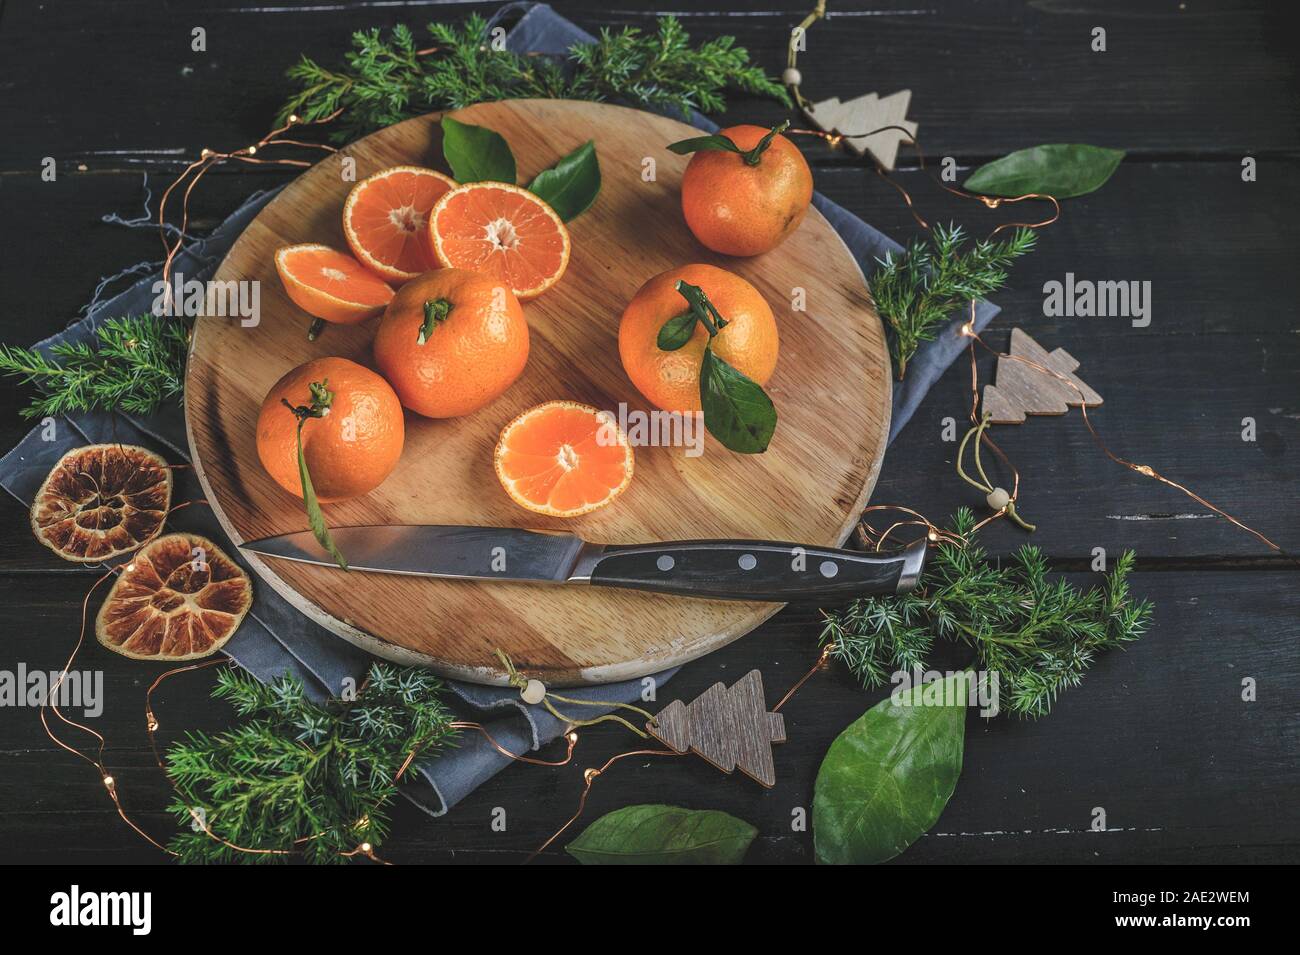 Tangerines on a festive Christmas rustic table setting with vintage dishes on a dark background. Stock Photo